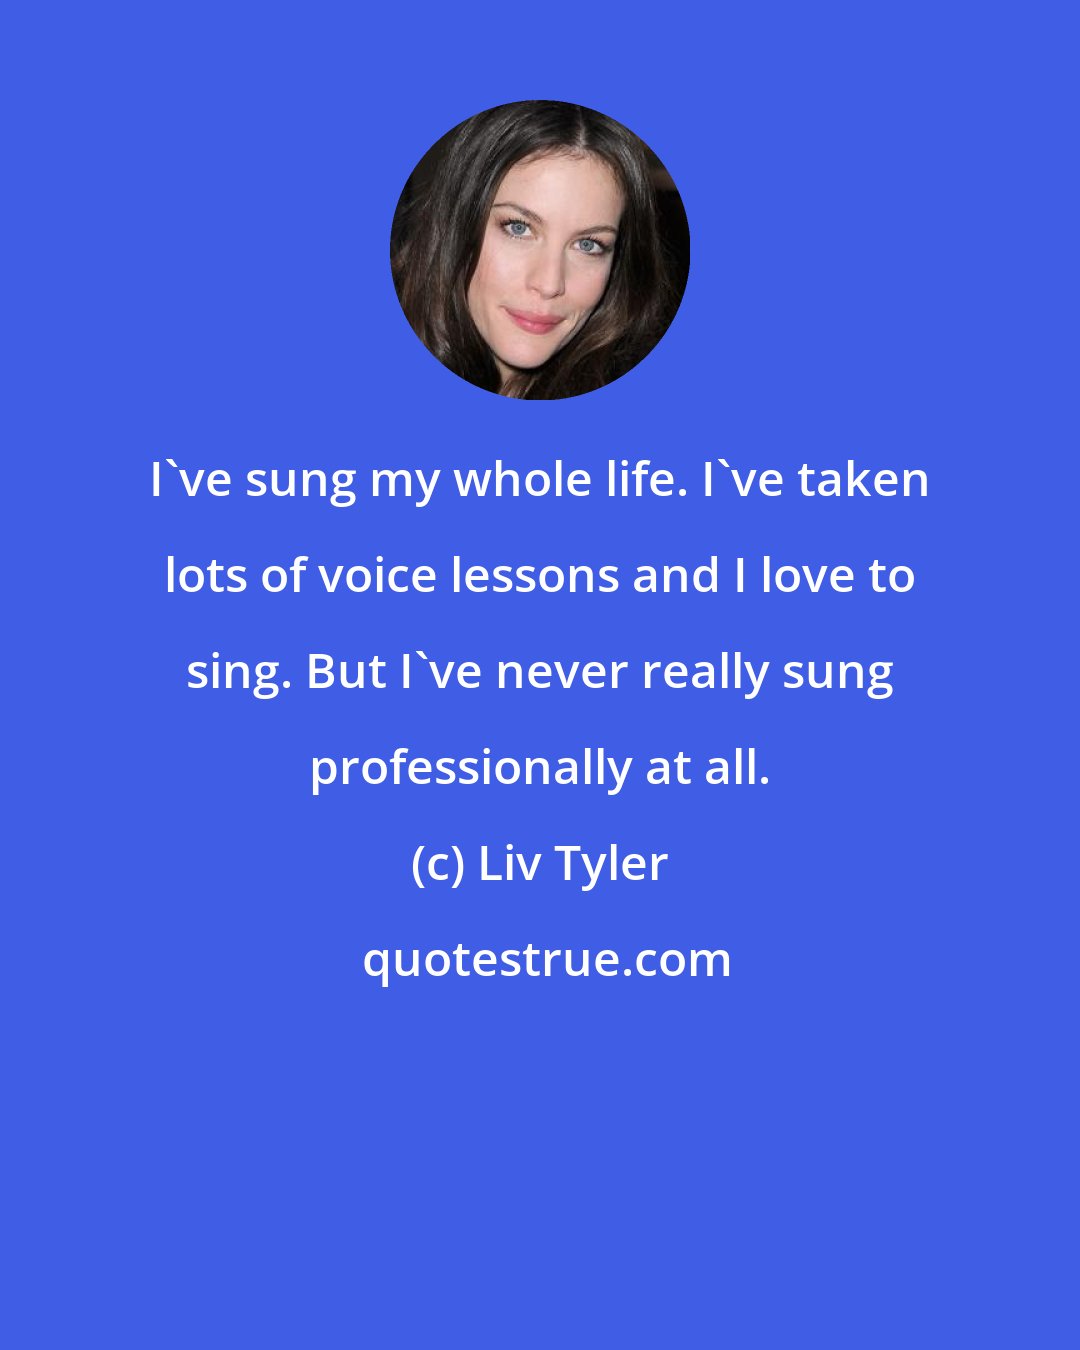 Liv Tyler: I've sung my whole life. I've taken lots of voice lessons and I love to sing. But I've never really sung professionally at all.